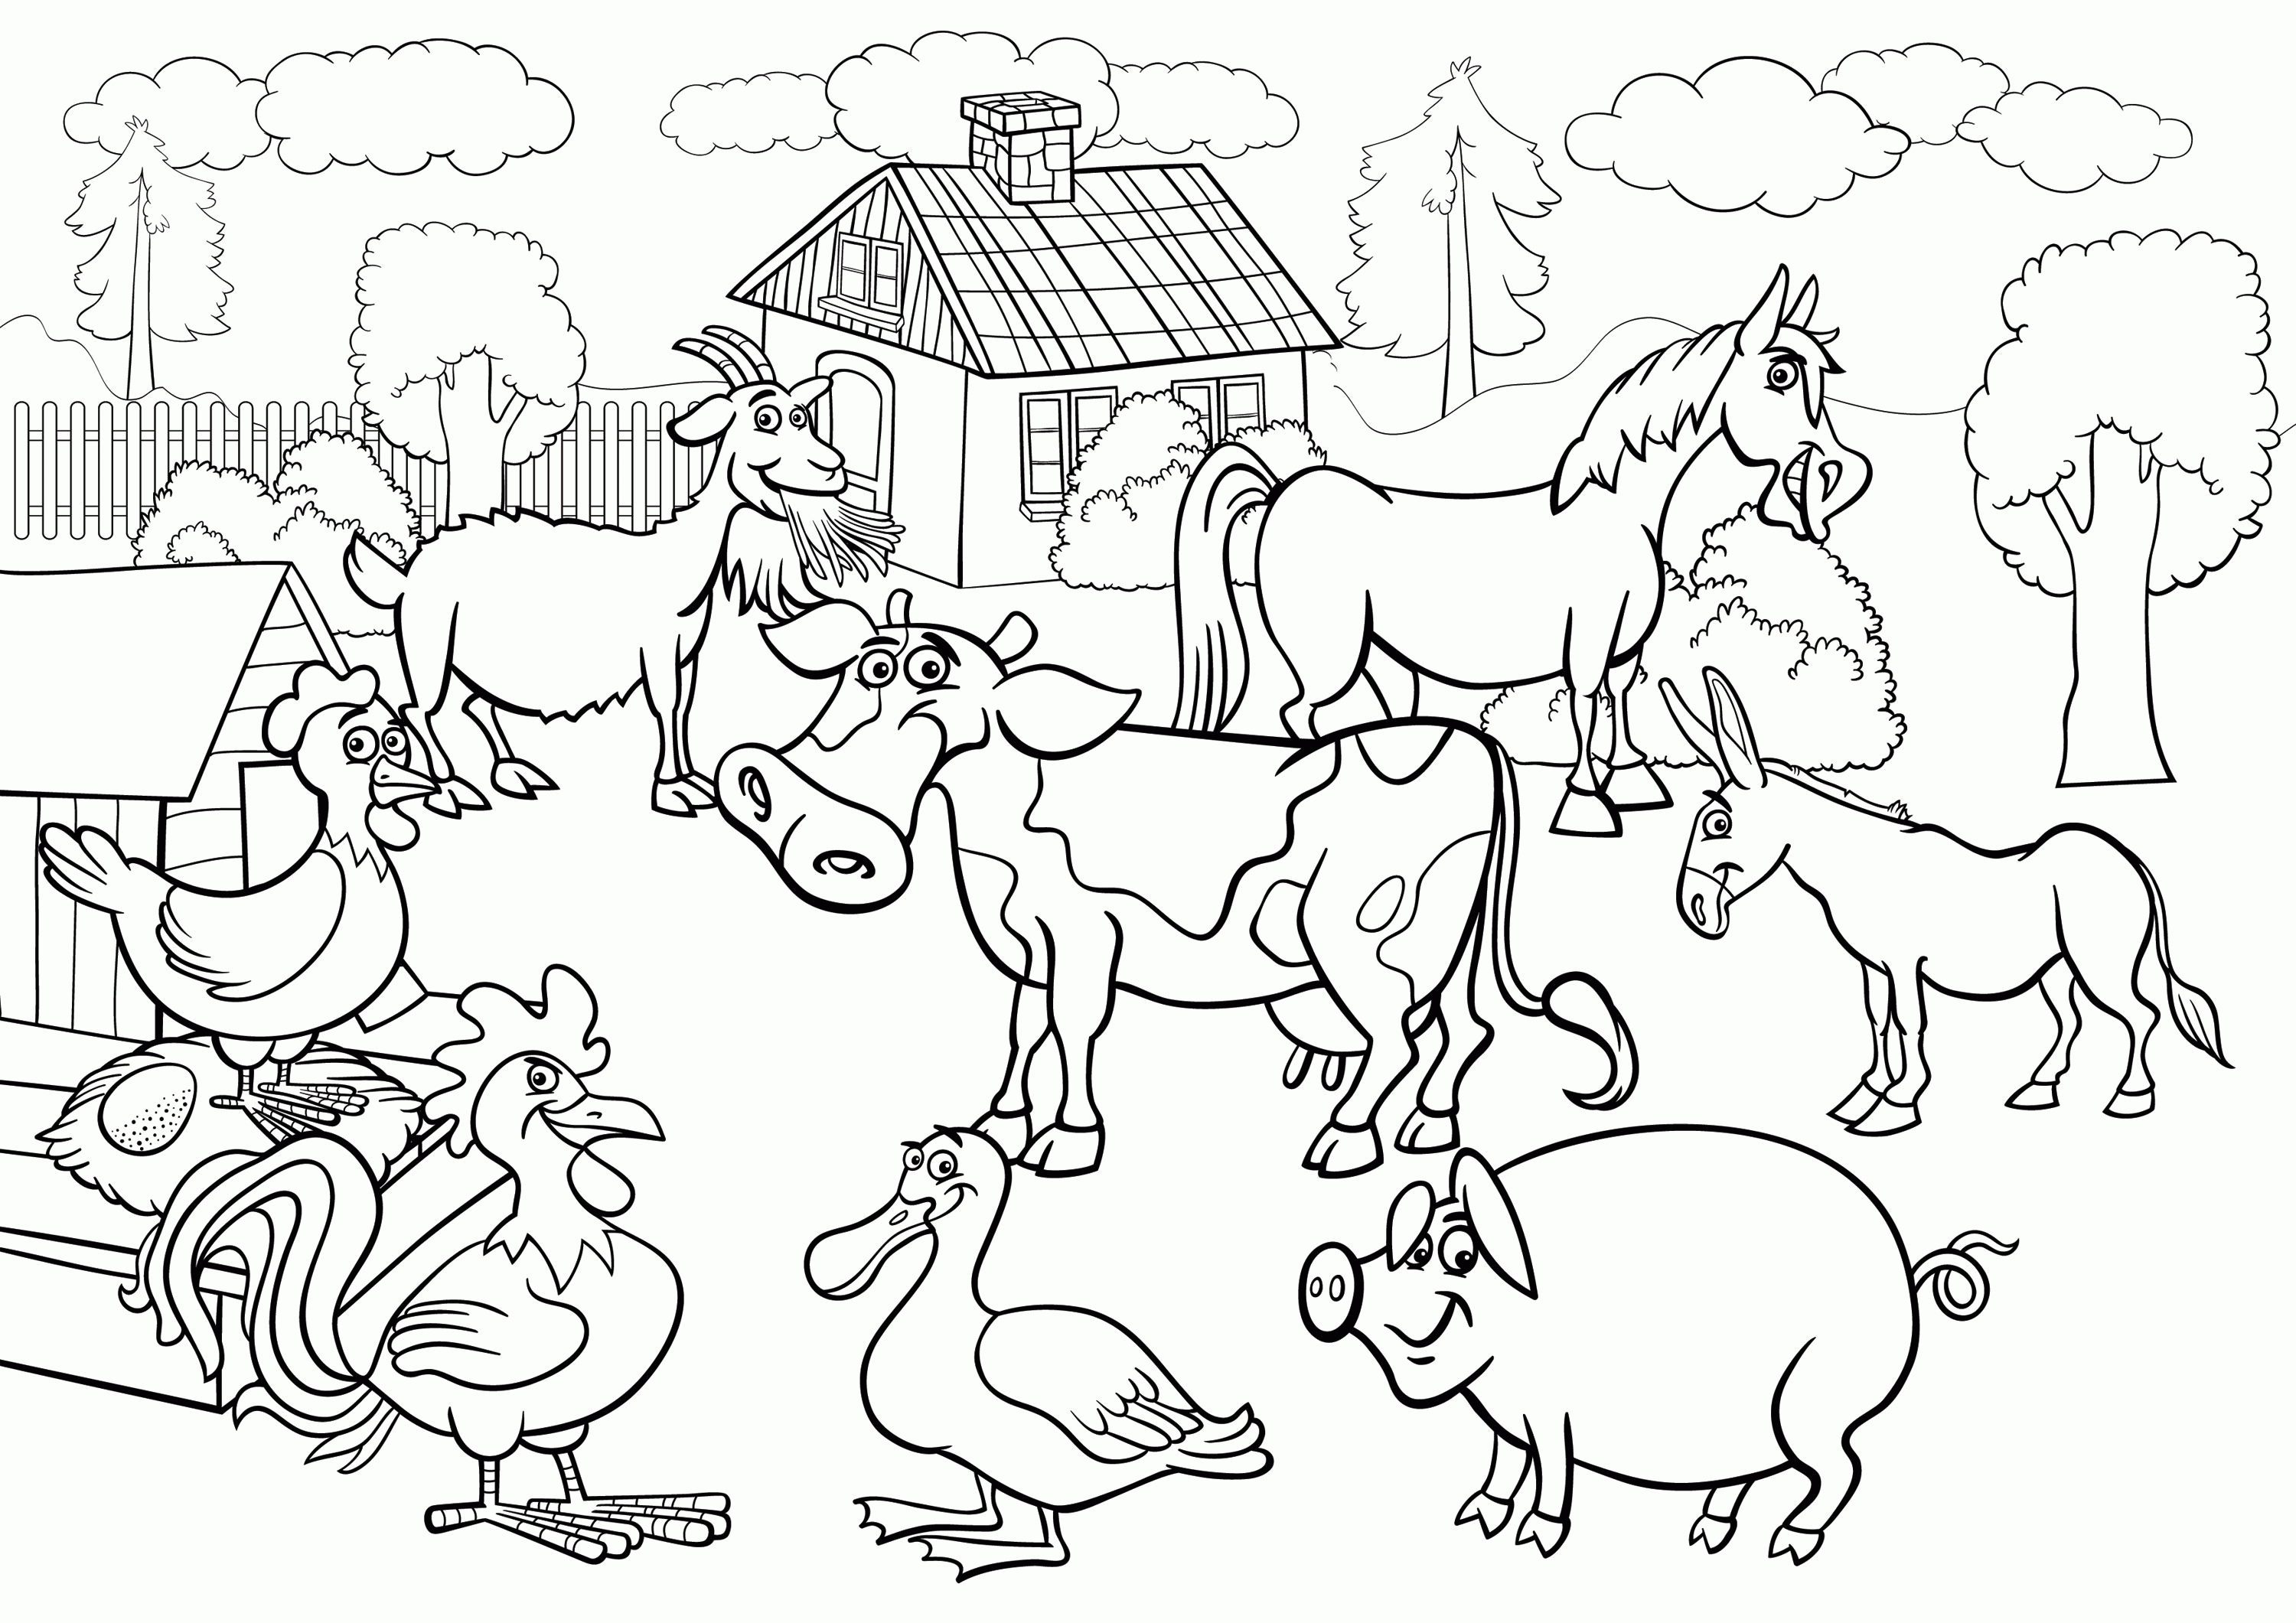 Free Coloring Page Of Farm Animals   VoteForVerde.com   Coloring Home